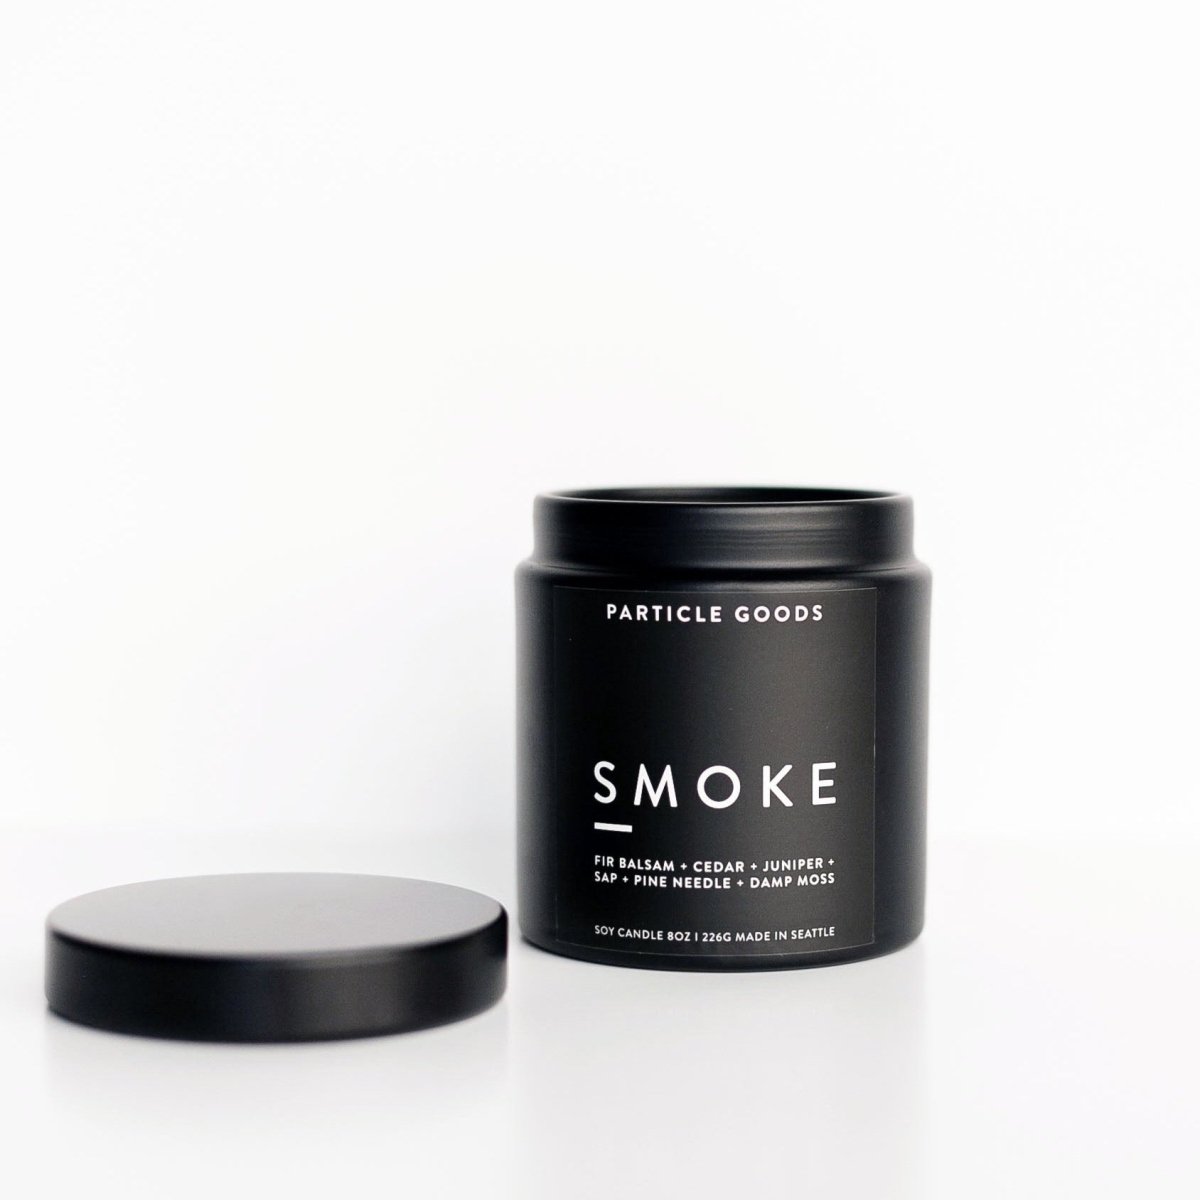 A cylindrical black container holds a soy based wax candle in the scent Smoke. The Smoke candle is hand-poured by Particle Goods in Seattle, WA.